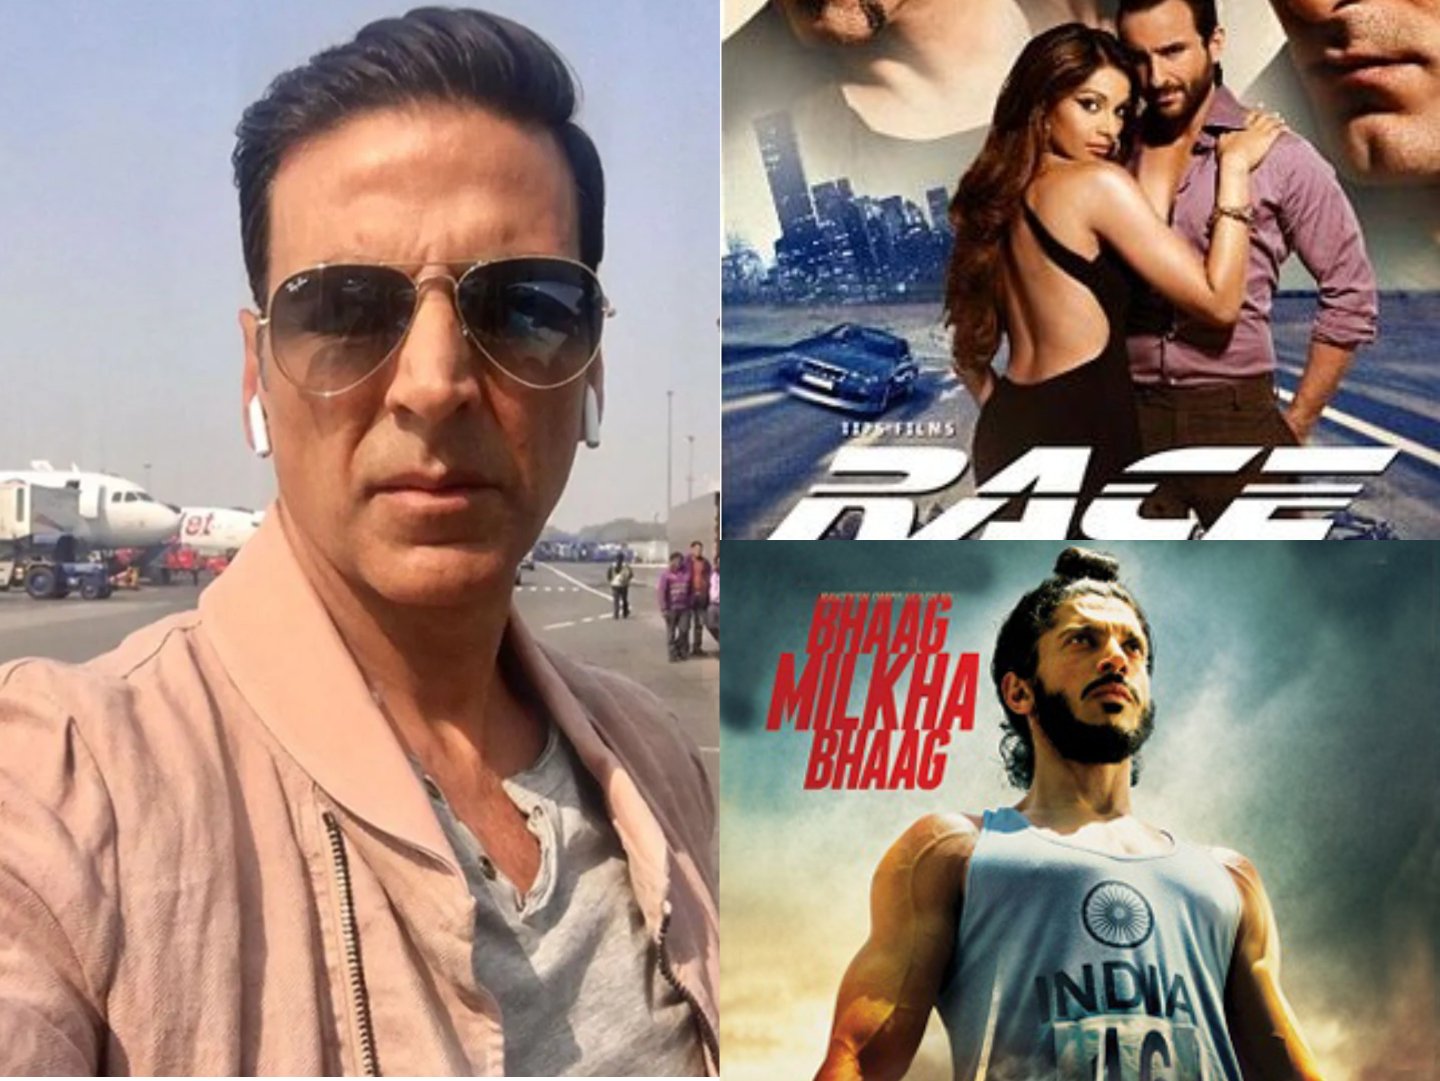 Bhaag Milka bhaag and Race were also rejected by Akshay